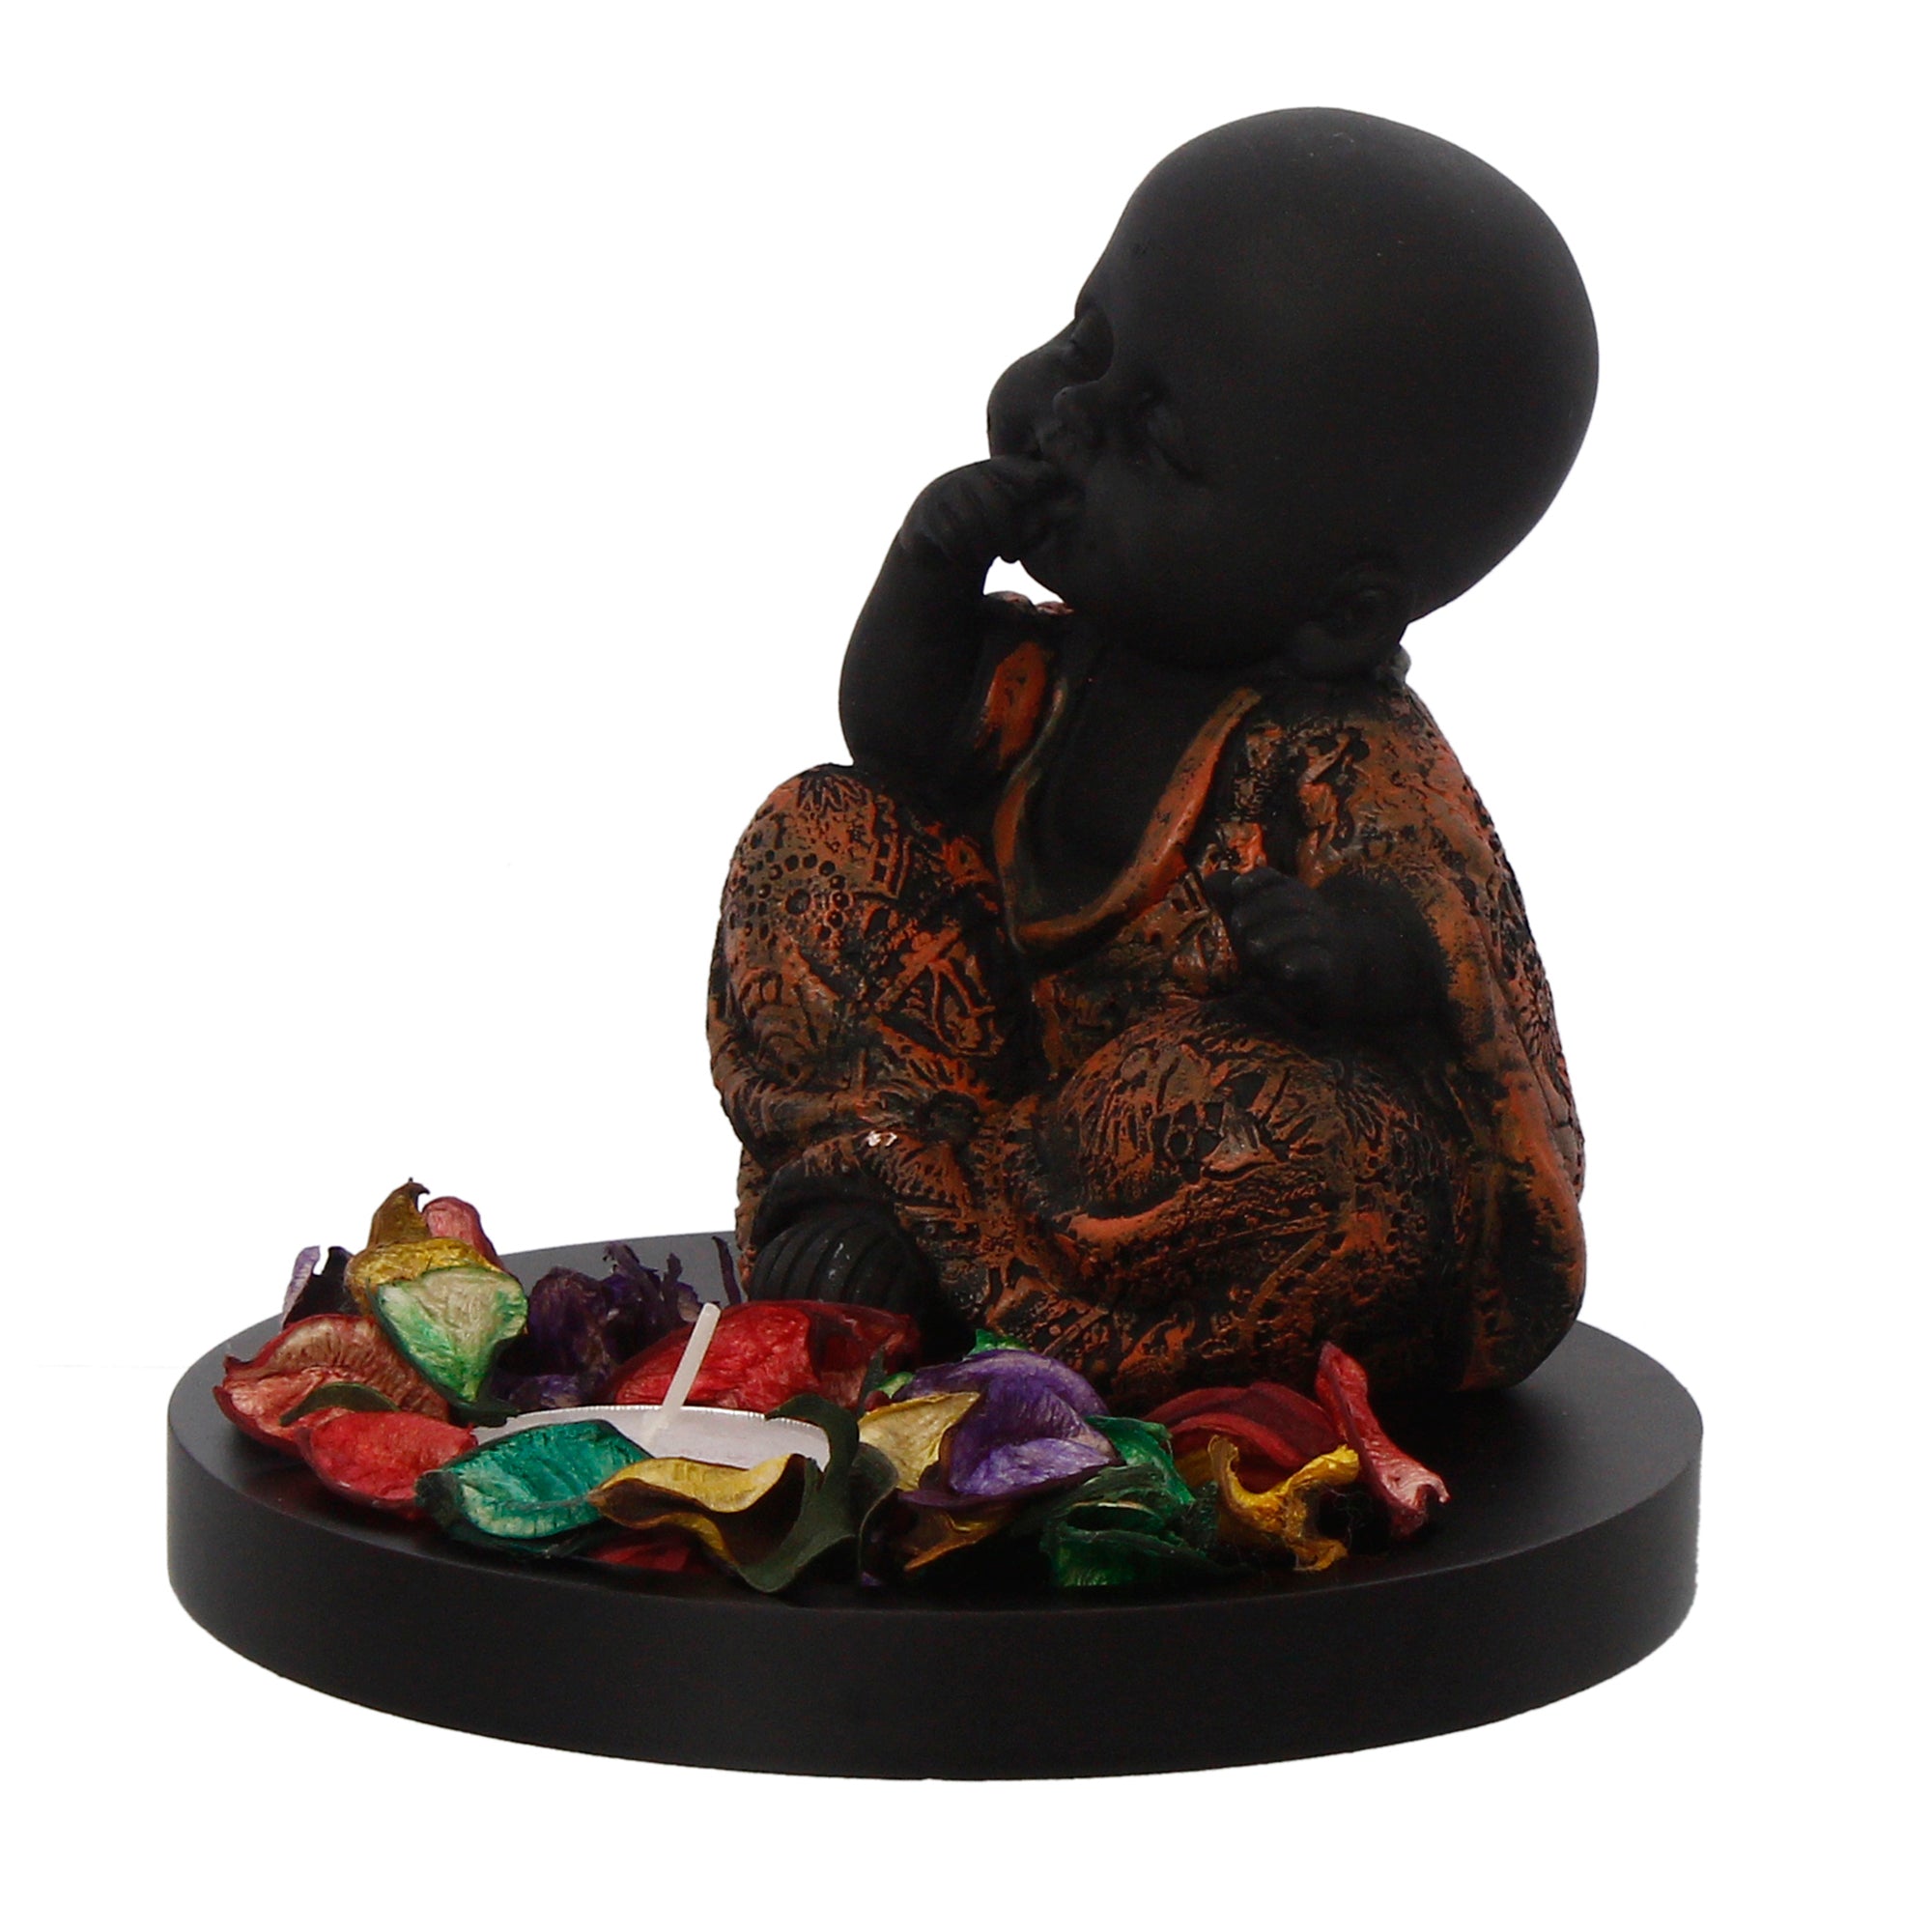 Decorative Smiling Copper Monk Buddha with Wooden Base, Fragranced Petals and Tealight 5